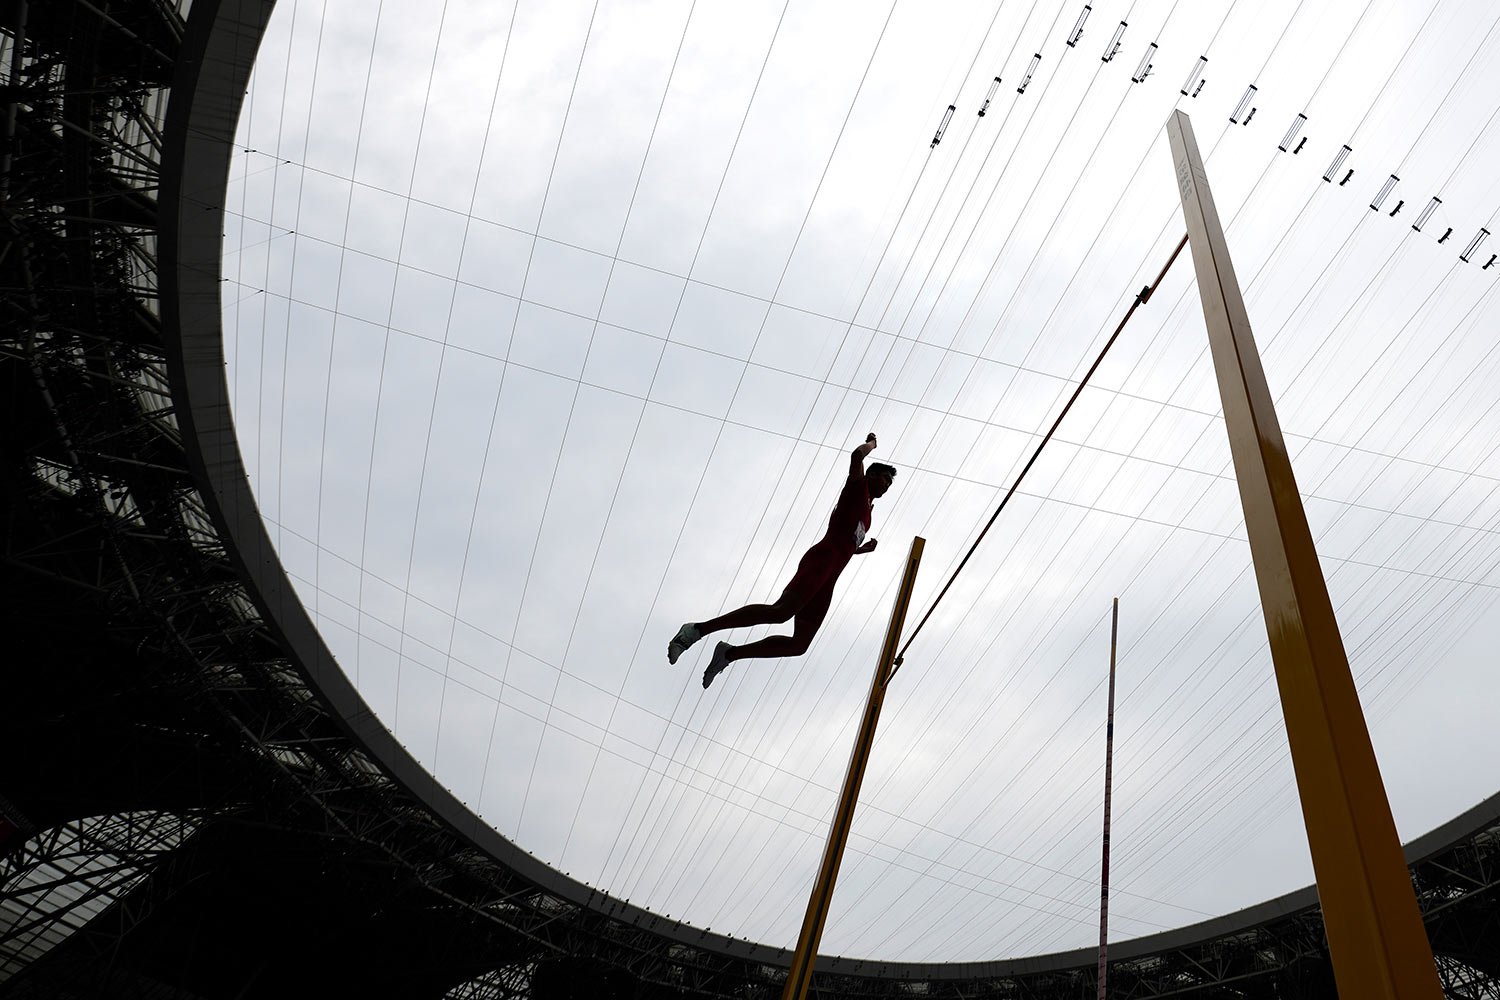  China's Sun Qihao competes during the men's decathlon pole vault at the 19th Asian Games in Hangzhou, China, Tuesday, Oct. 3, 2023. (AP Photo/Lee Jin-man) 